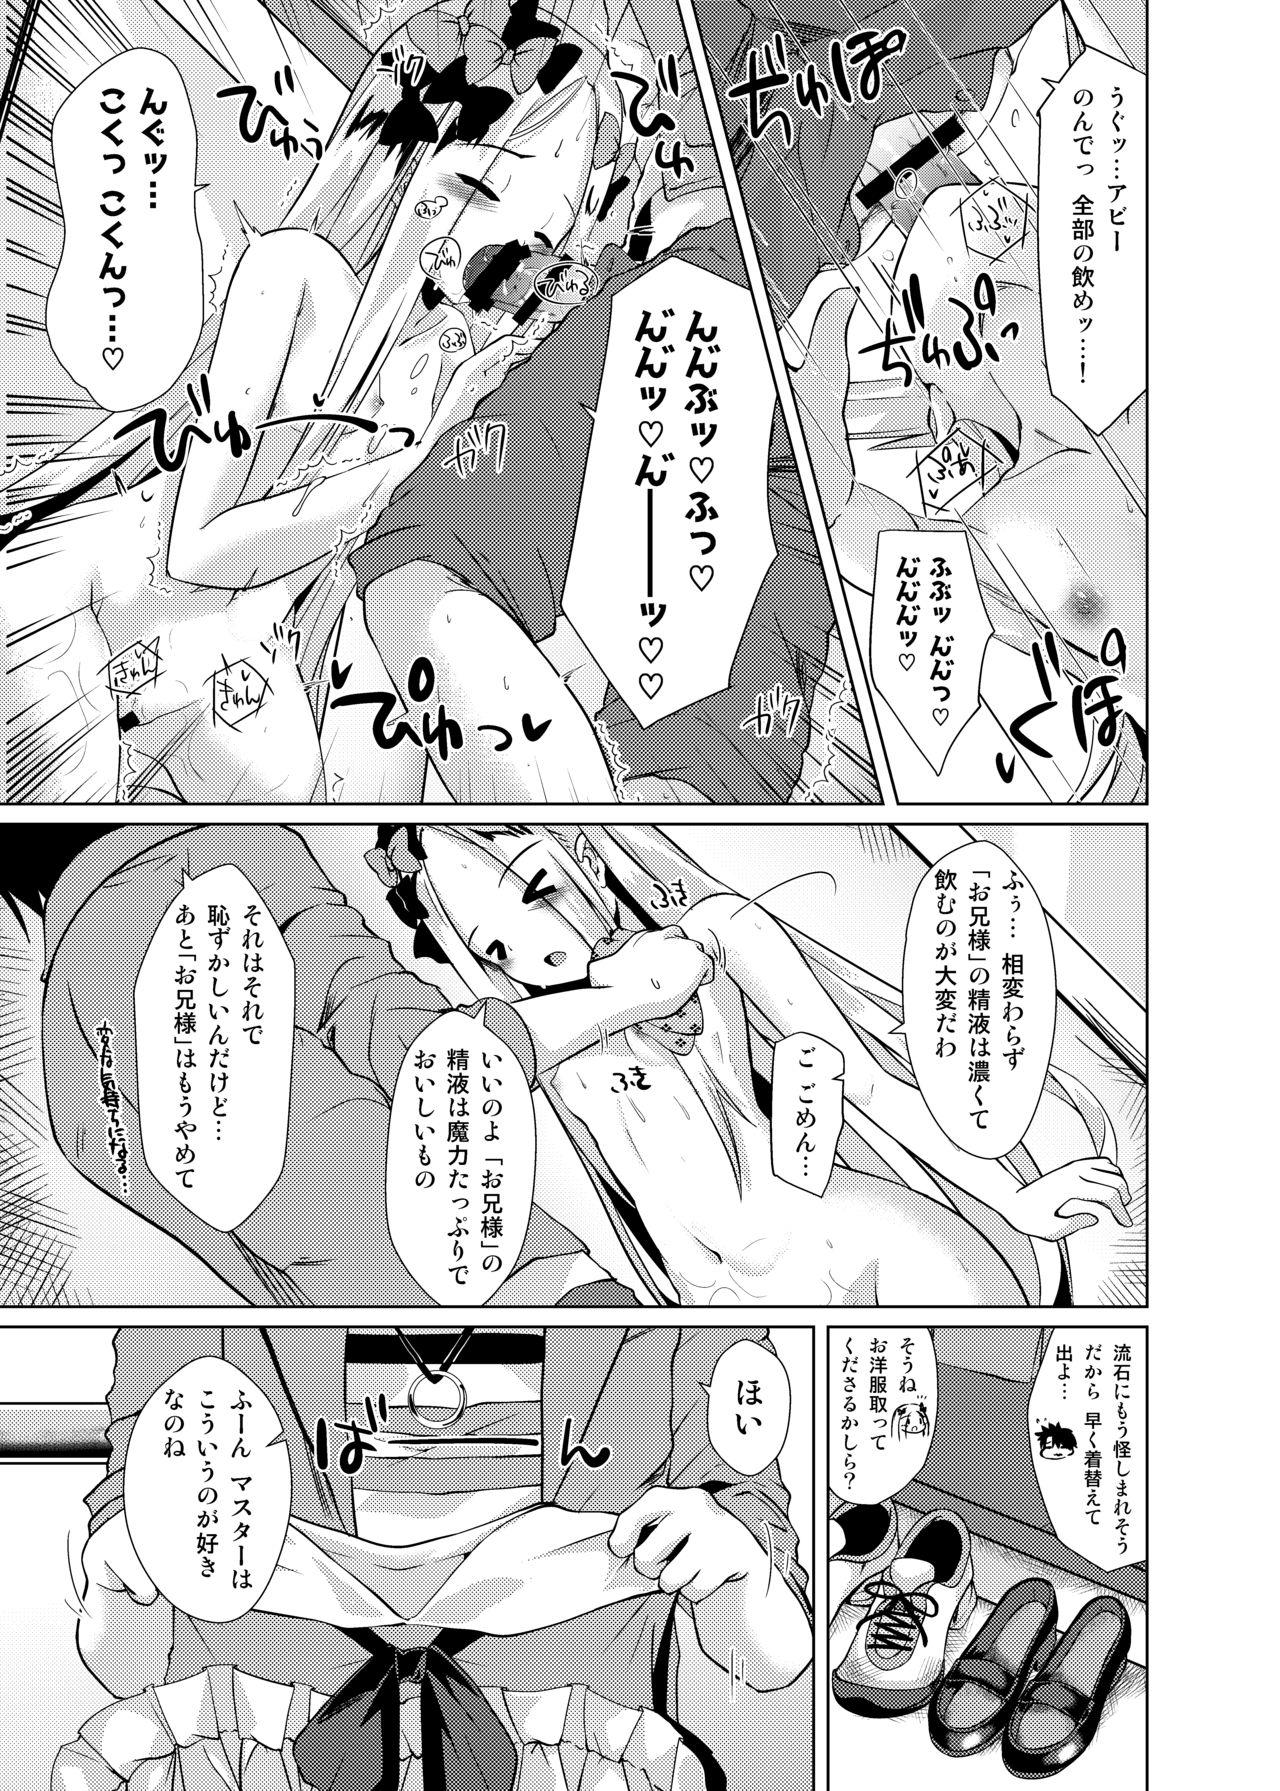 Puto Chaldea Outdoor Challenge Abby-chan to Issho 3 - Fate grand order Futa - Page 8